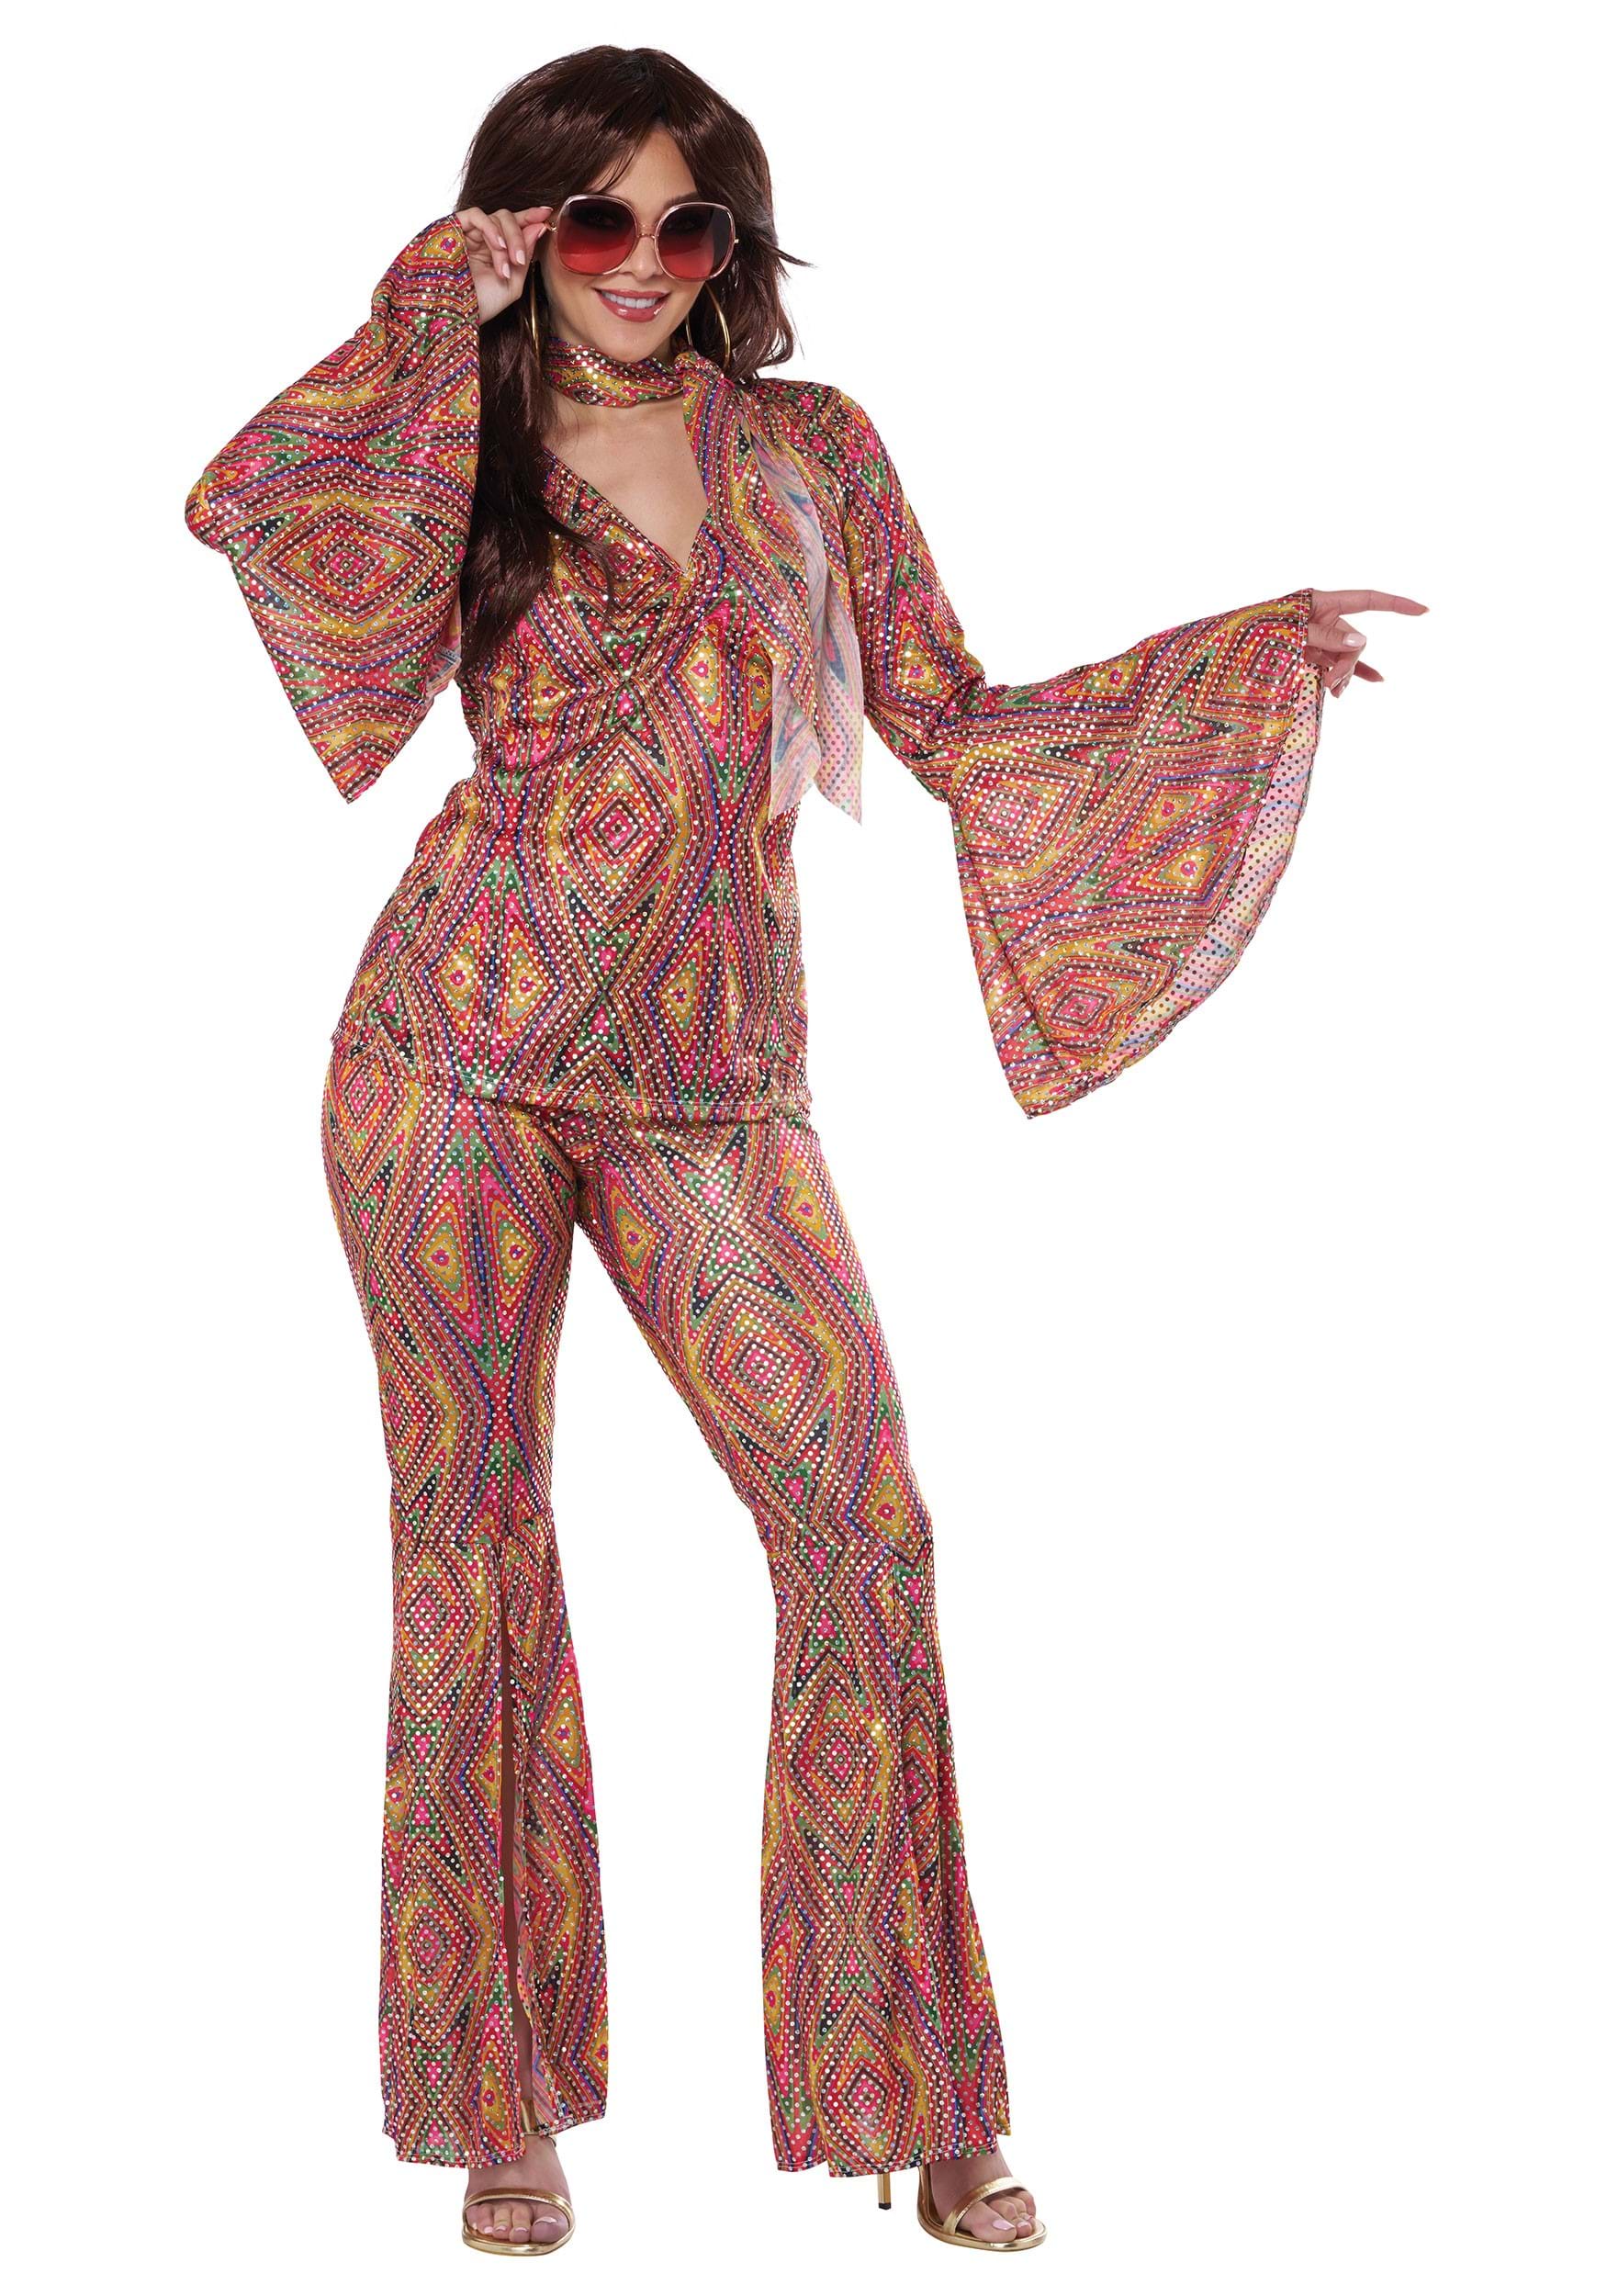 1970s Womens Discolicious Costume | 1970s Costumes